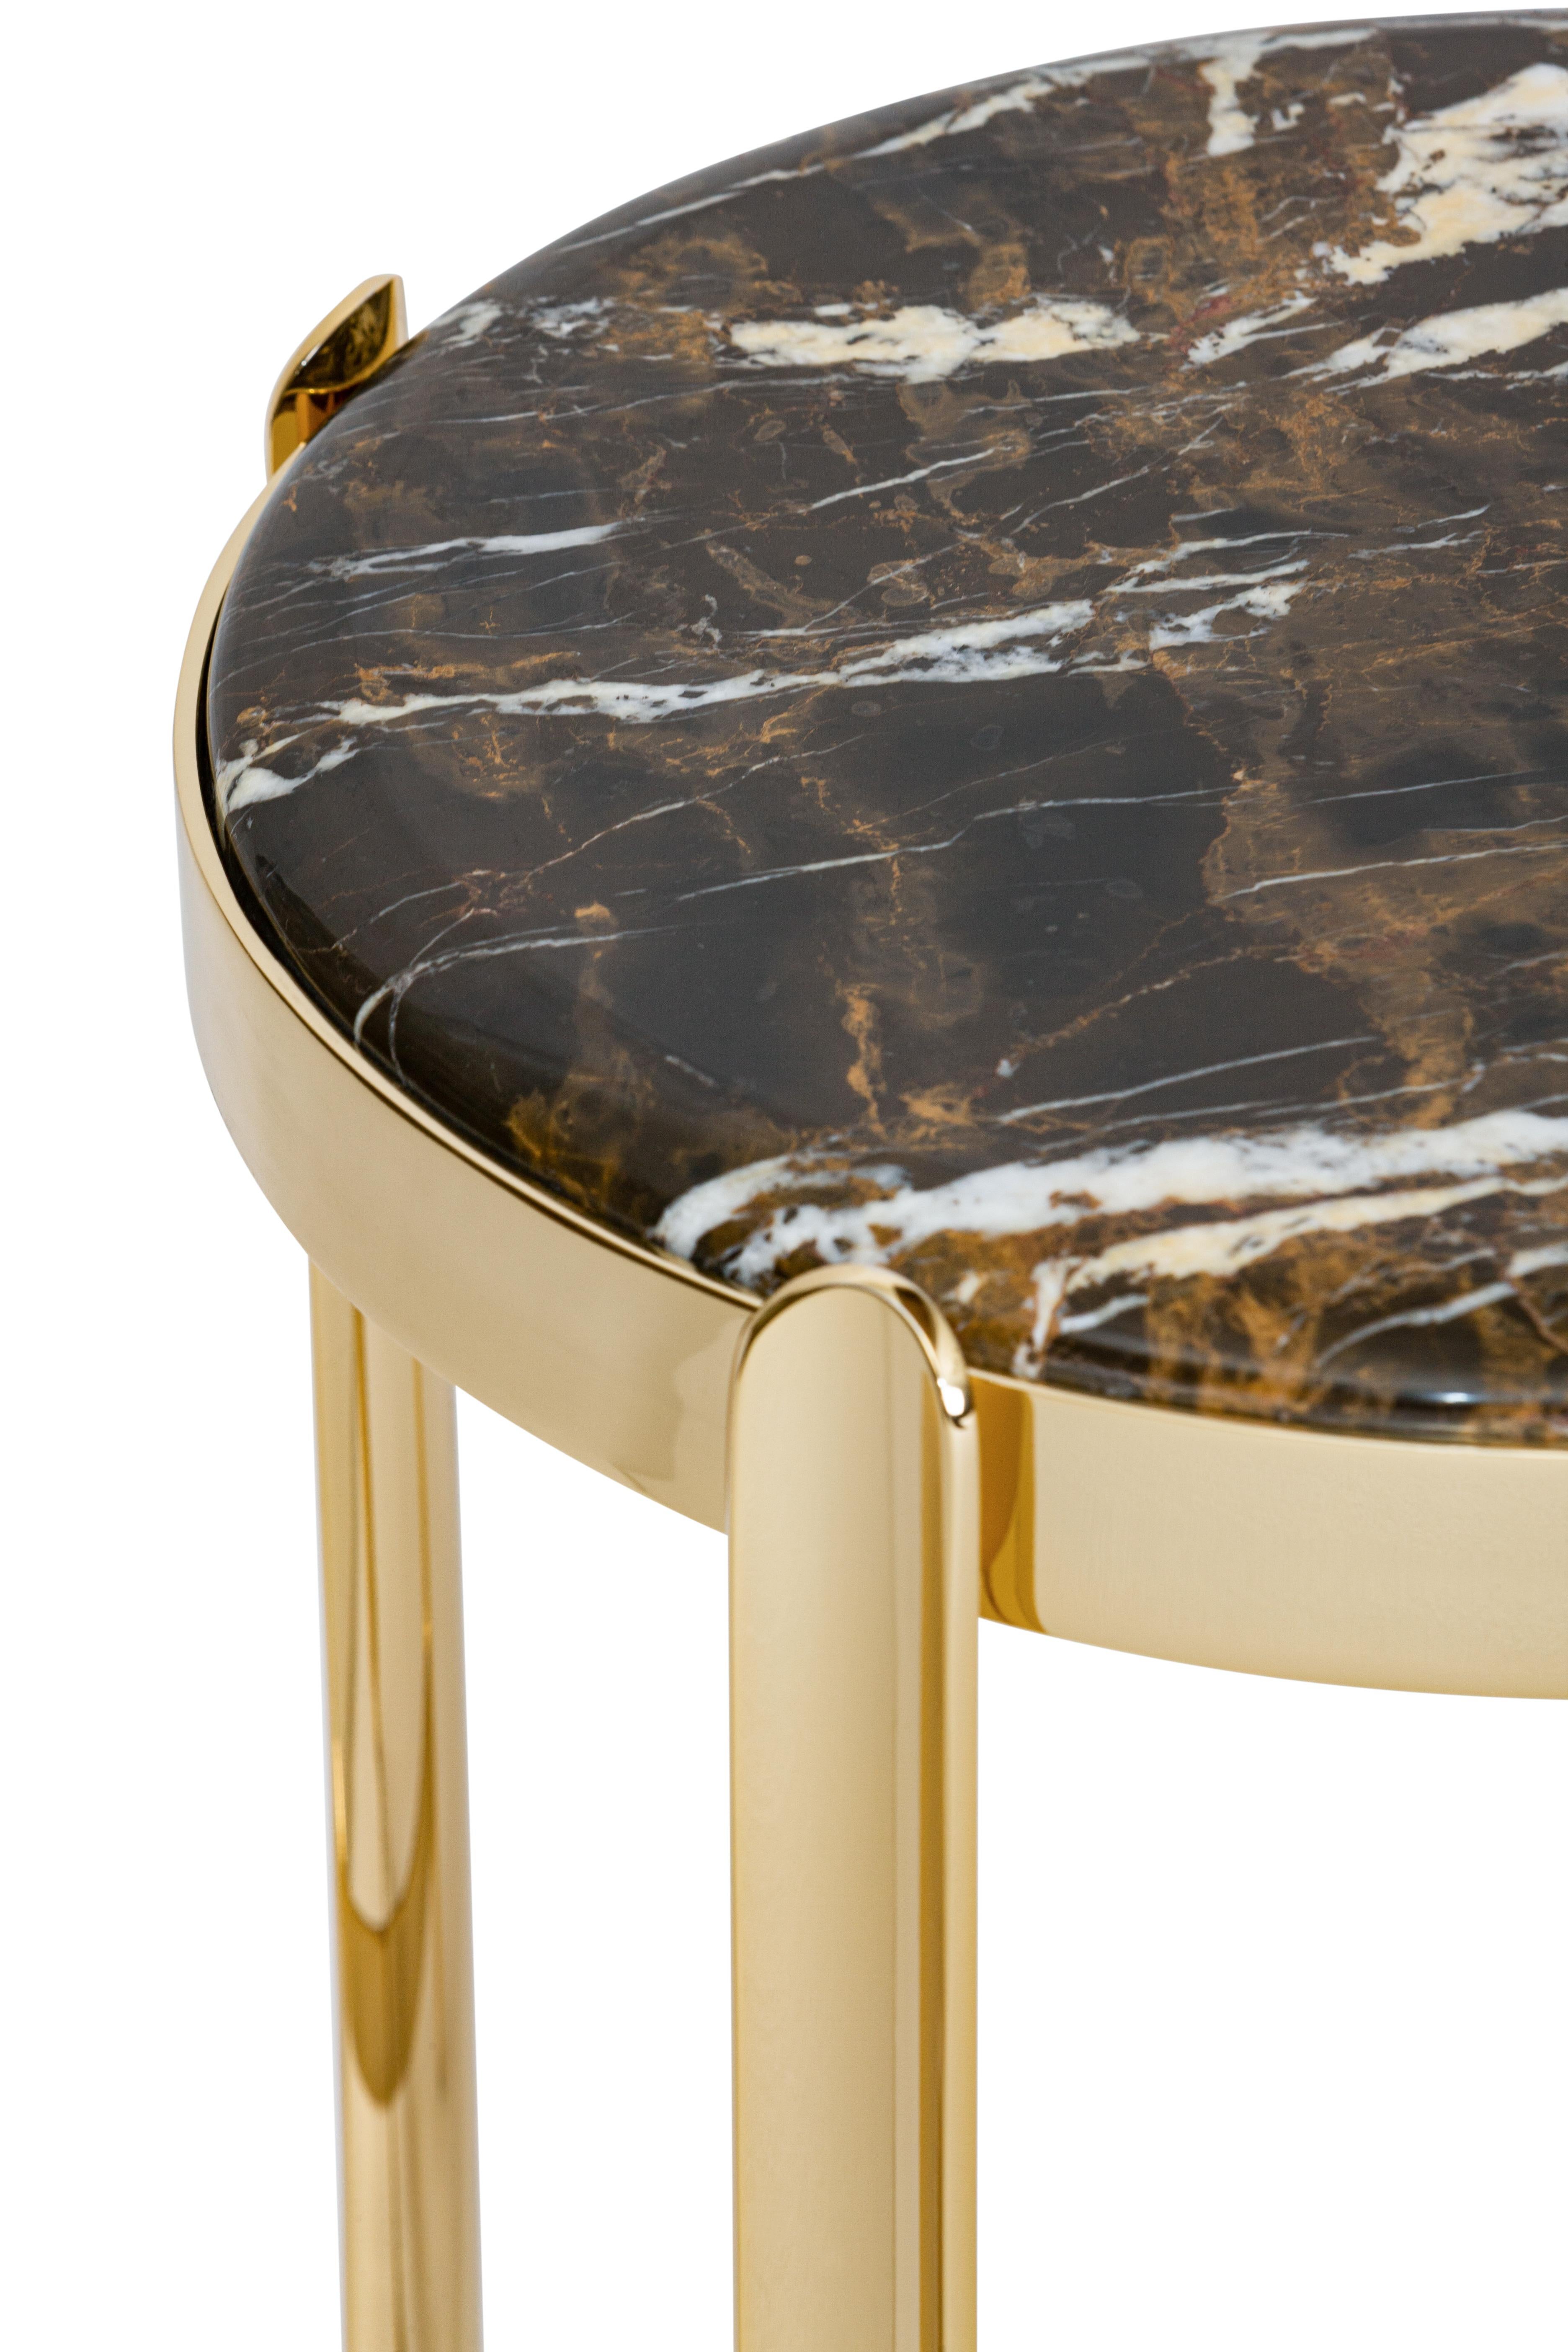 21st Century Art Déco Elie Saab Maison black & gold marble side table, Italy

Named after its strategic position in interiors, the Zenith low tables and consoles add a refined and contemporary glamour to each room. Series of low tables, consoles and